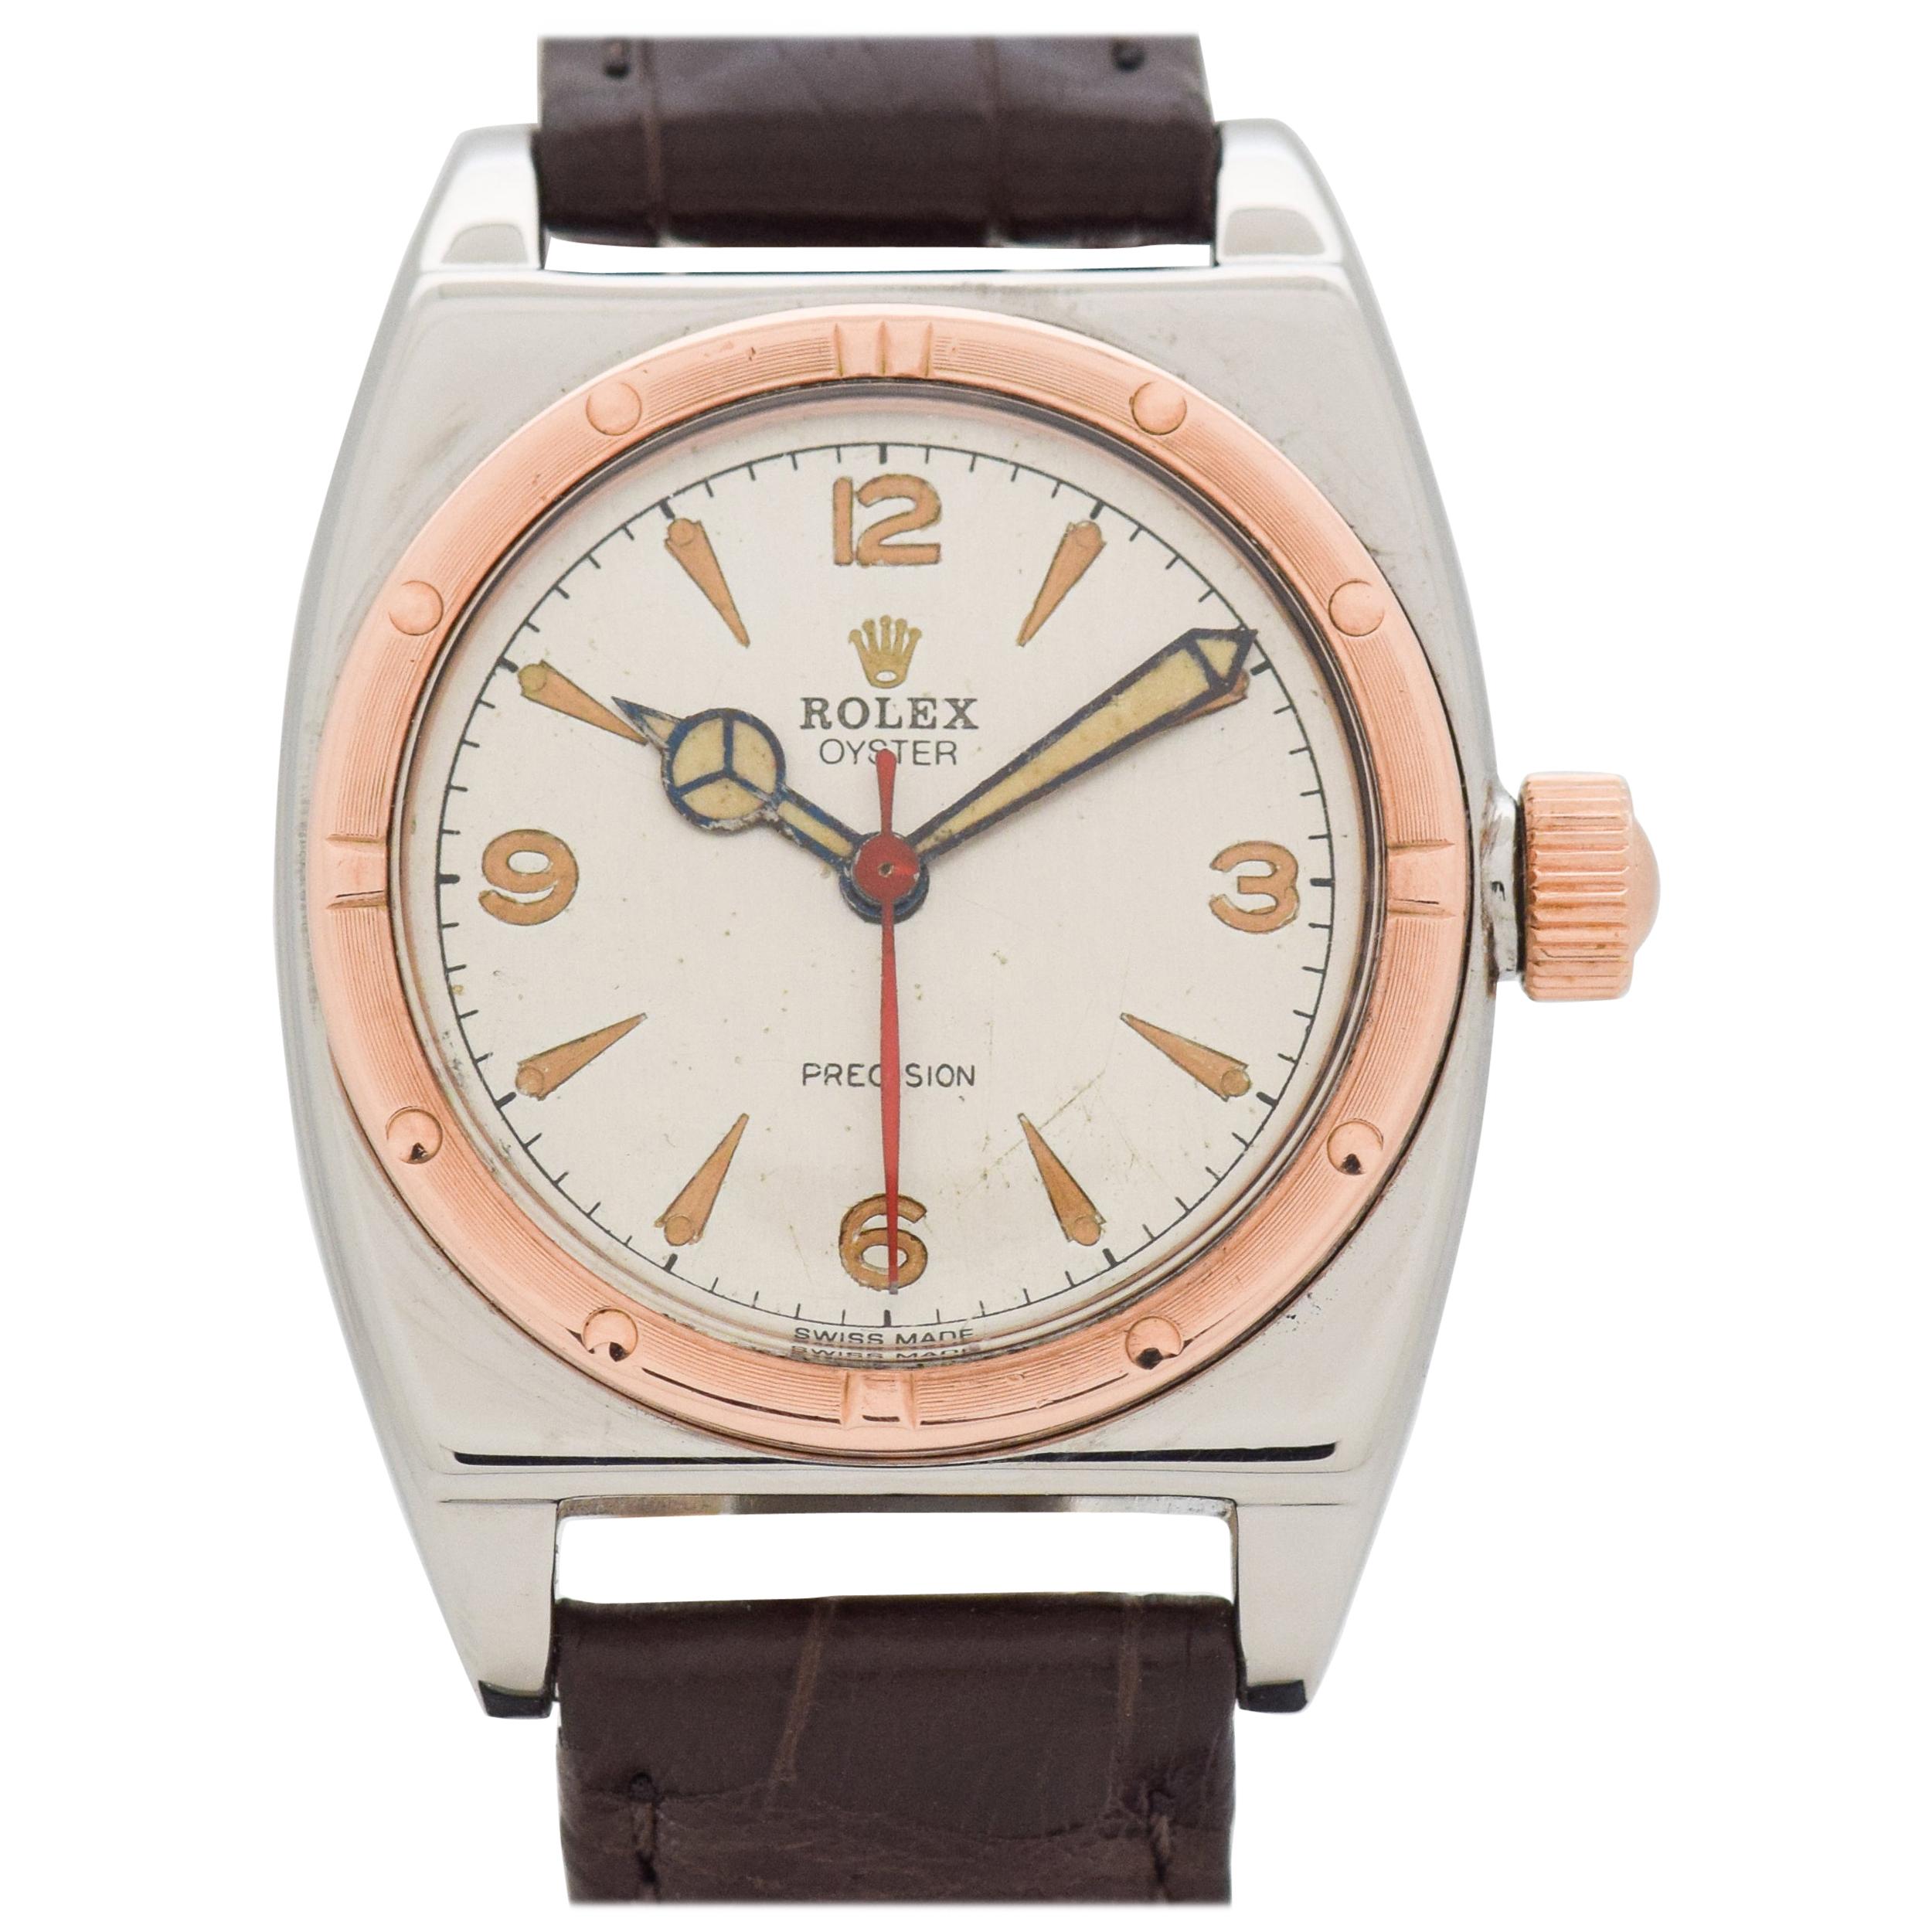 Vintage Rolex Oyster Viceroy 10 Karat Rose Gold and Stainless Steel Watch, 1943